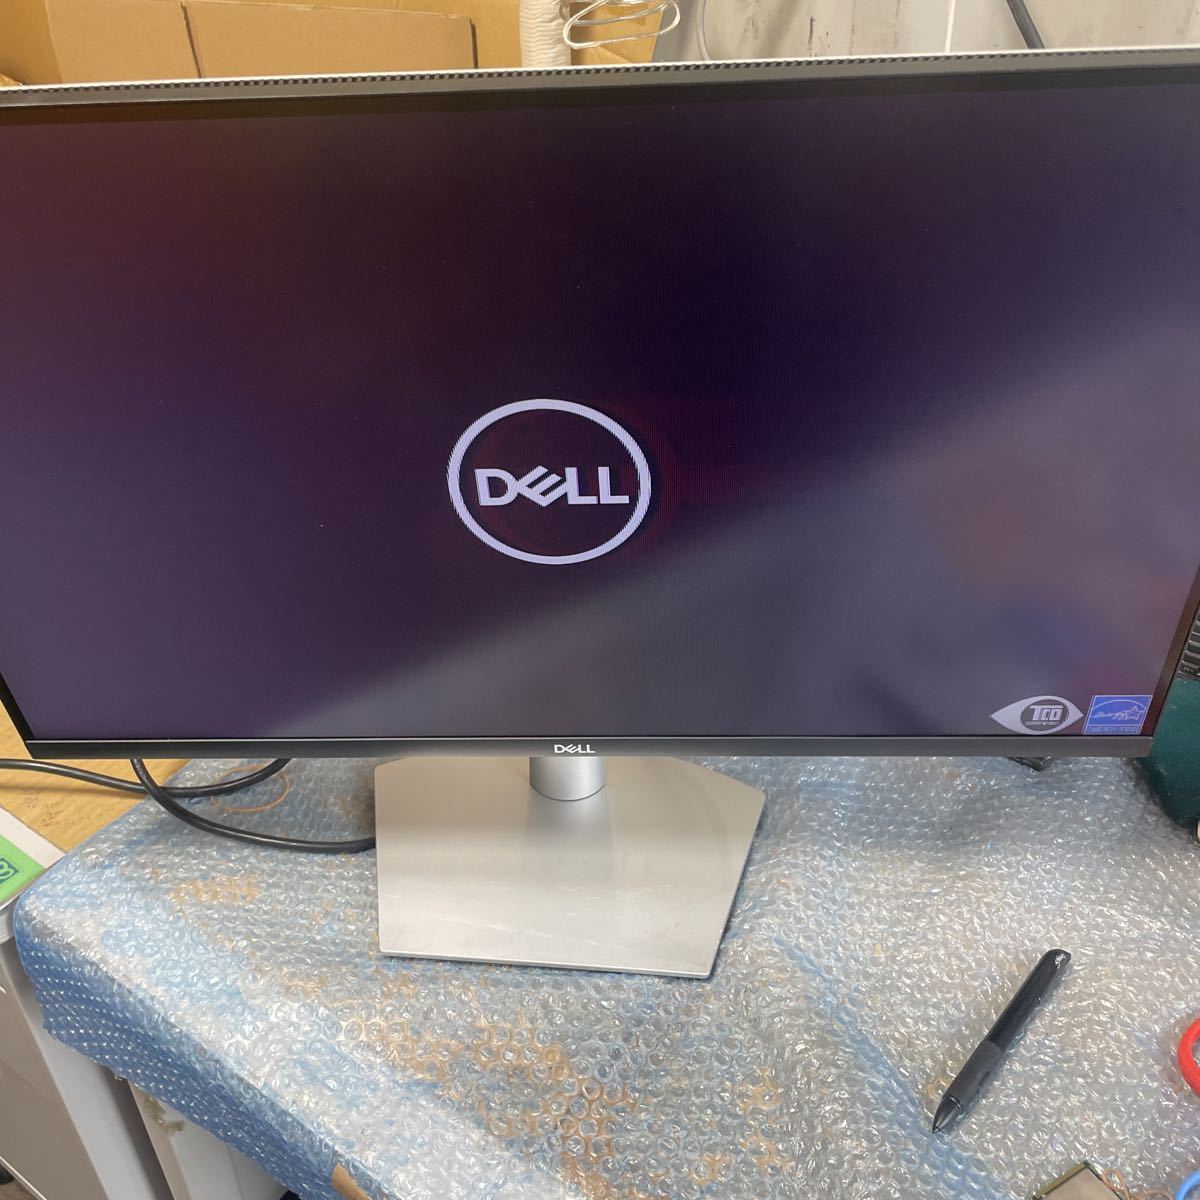 N-20)DELL S2721DS 27インチ 液晶 モニター ディスプレイ 2021年製 映像 機器 家電 中古